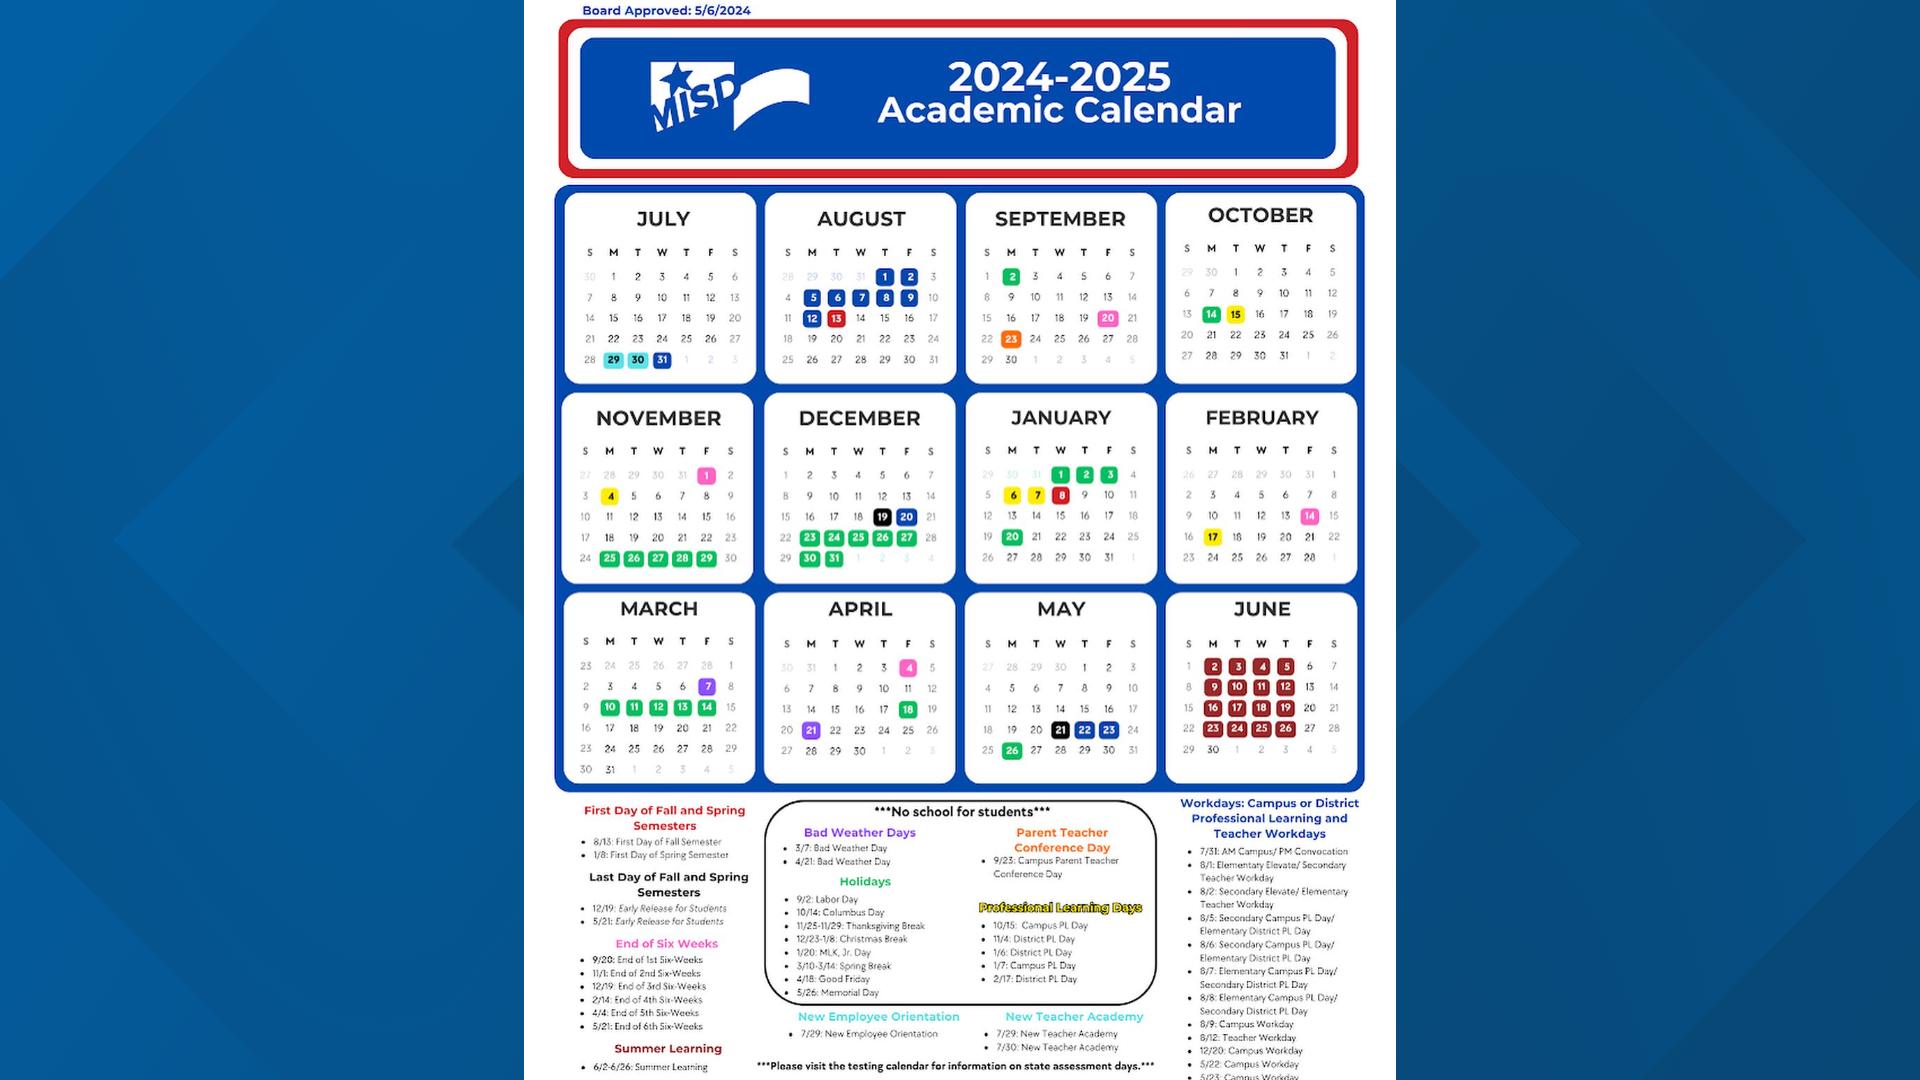 The notable changes to the calendar include the first day of school starting on Tuesday, August 13, and the conclusion of the school year on May 21 for students.